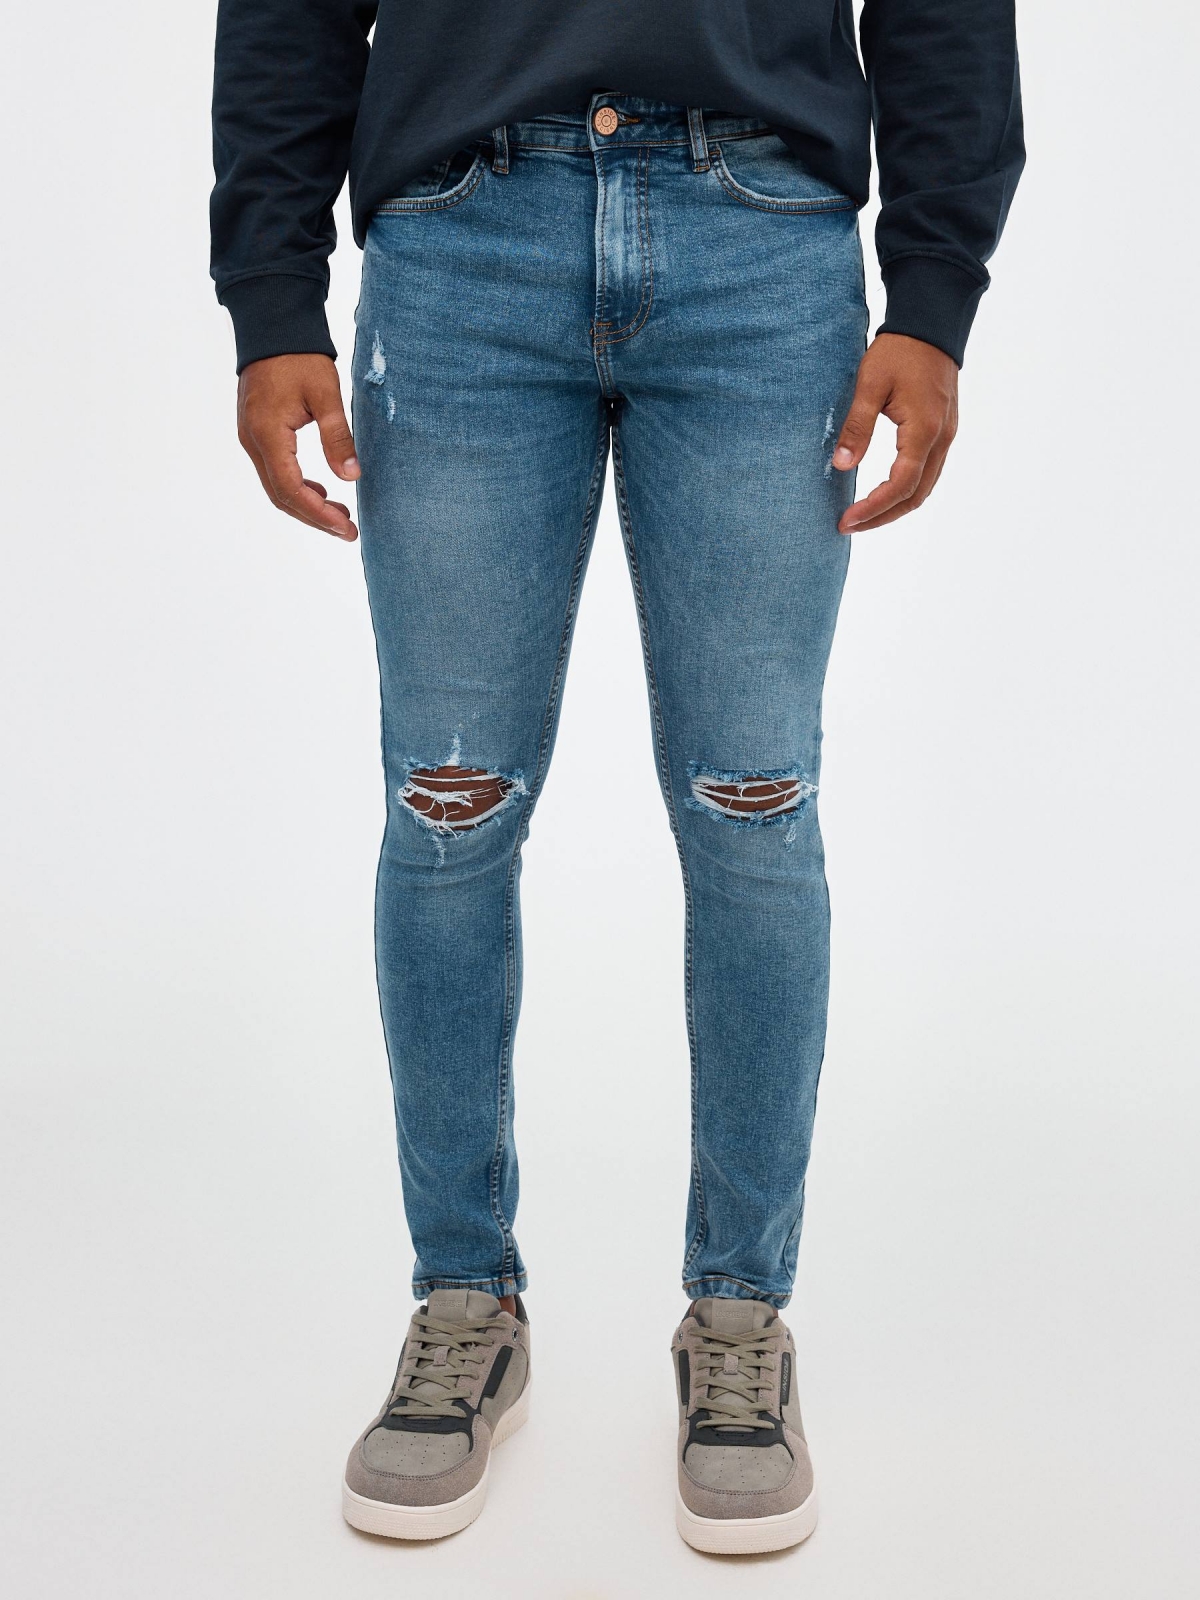 Ripped skinny jeans blue middle front view